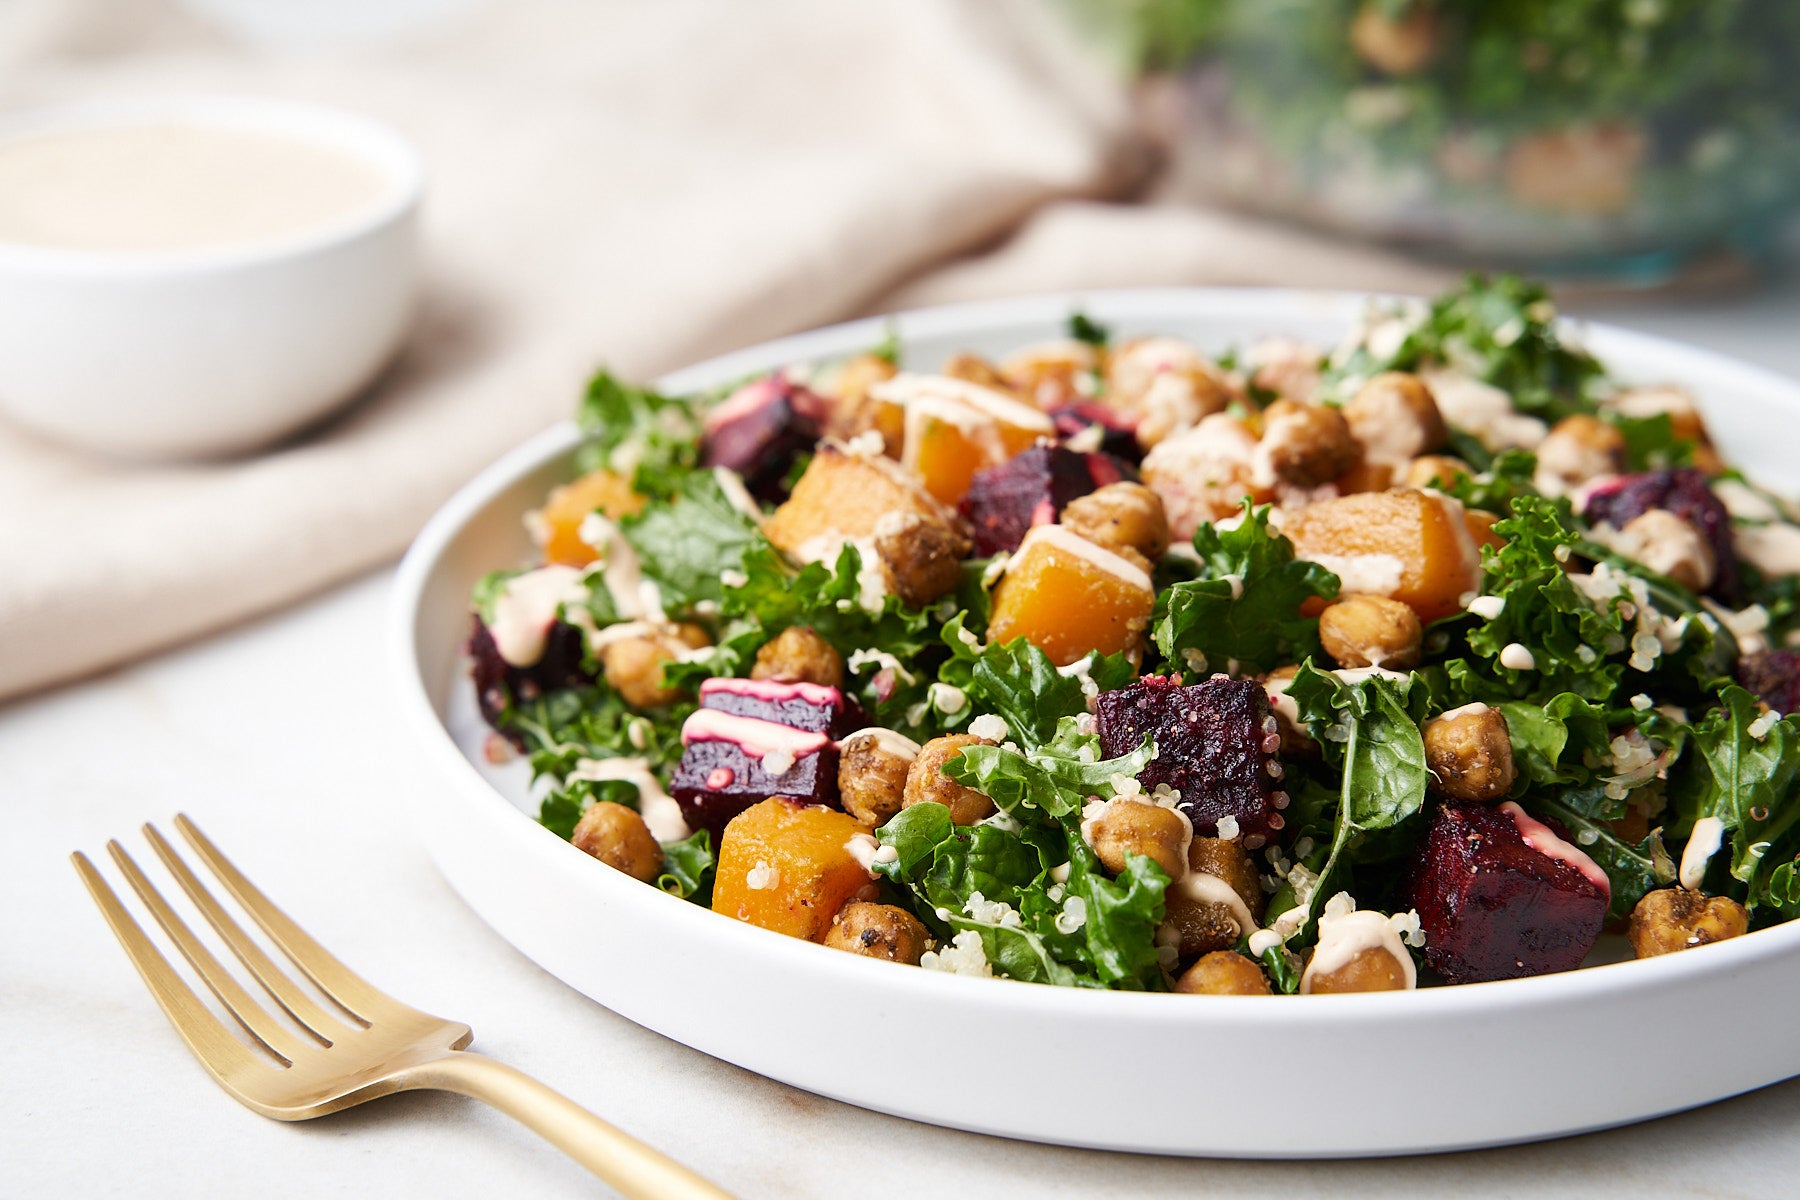 Love kale? Make this healthy plant-based salad recipe.